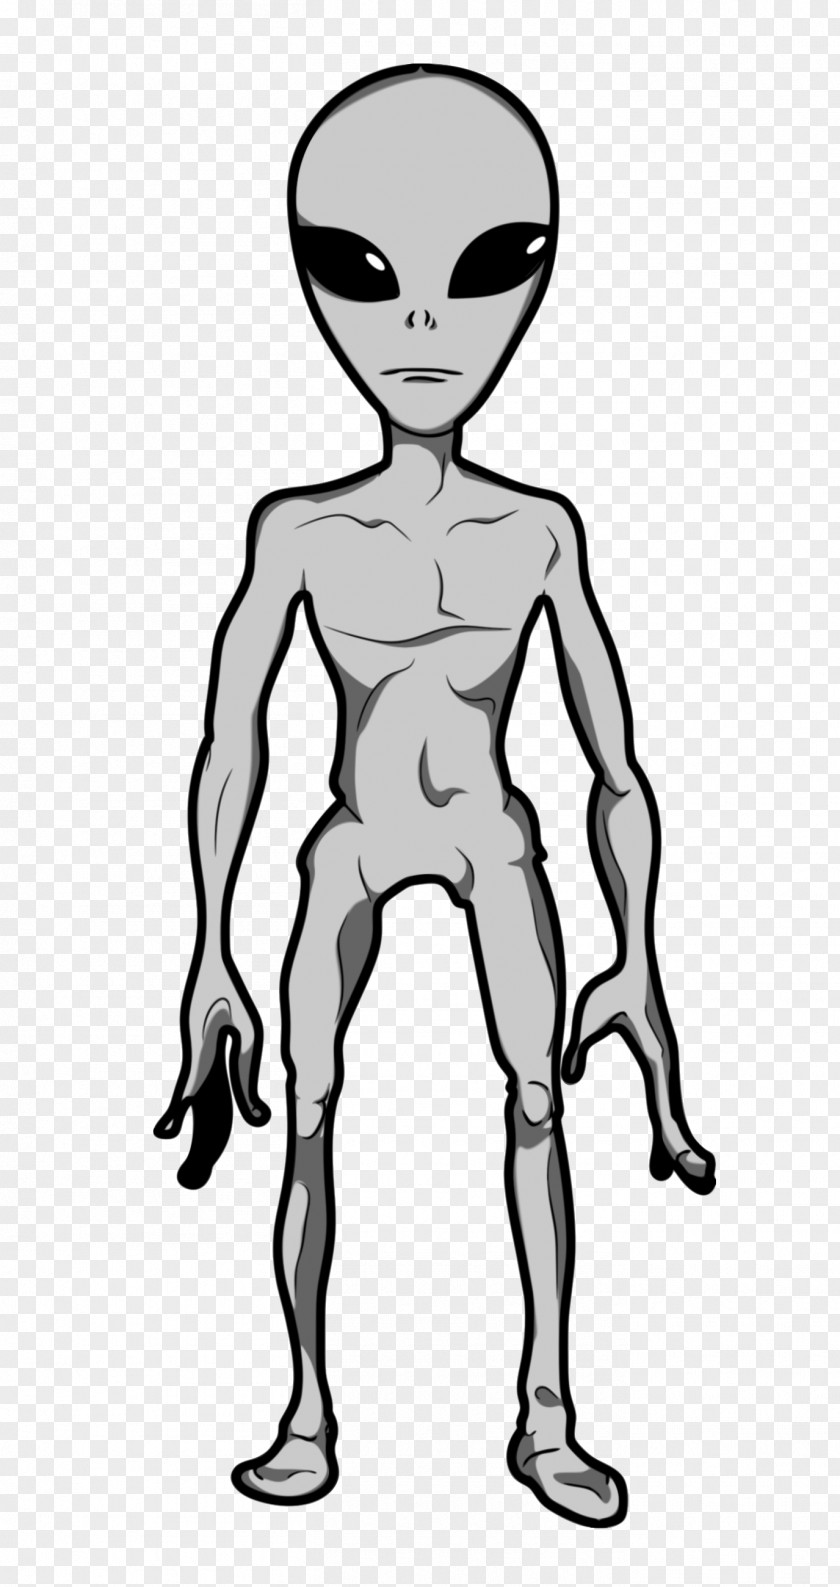 Humanoid Extraterrestrial Life Grey Alien Clip Art Drawing Image PNG